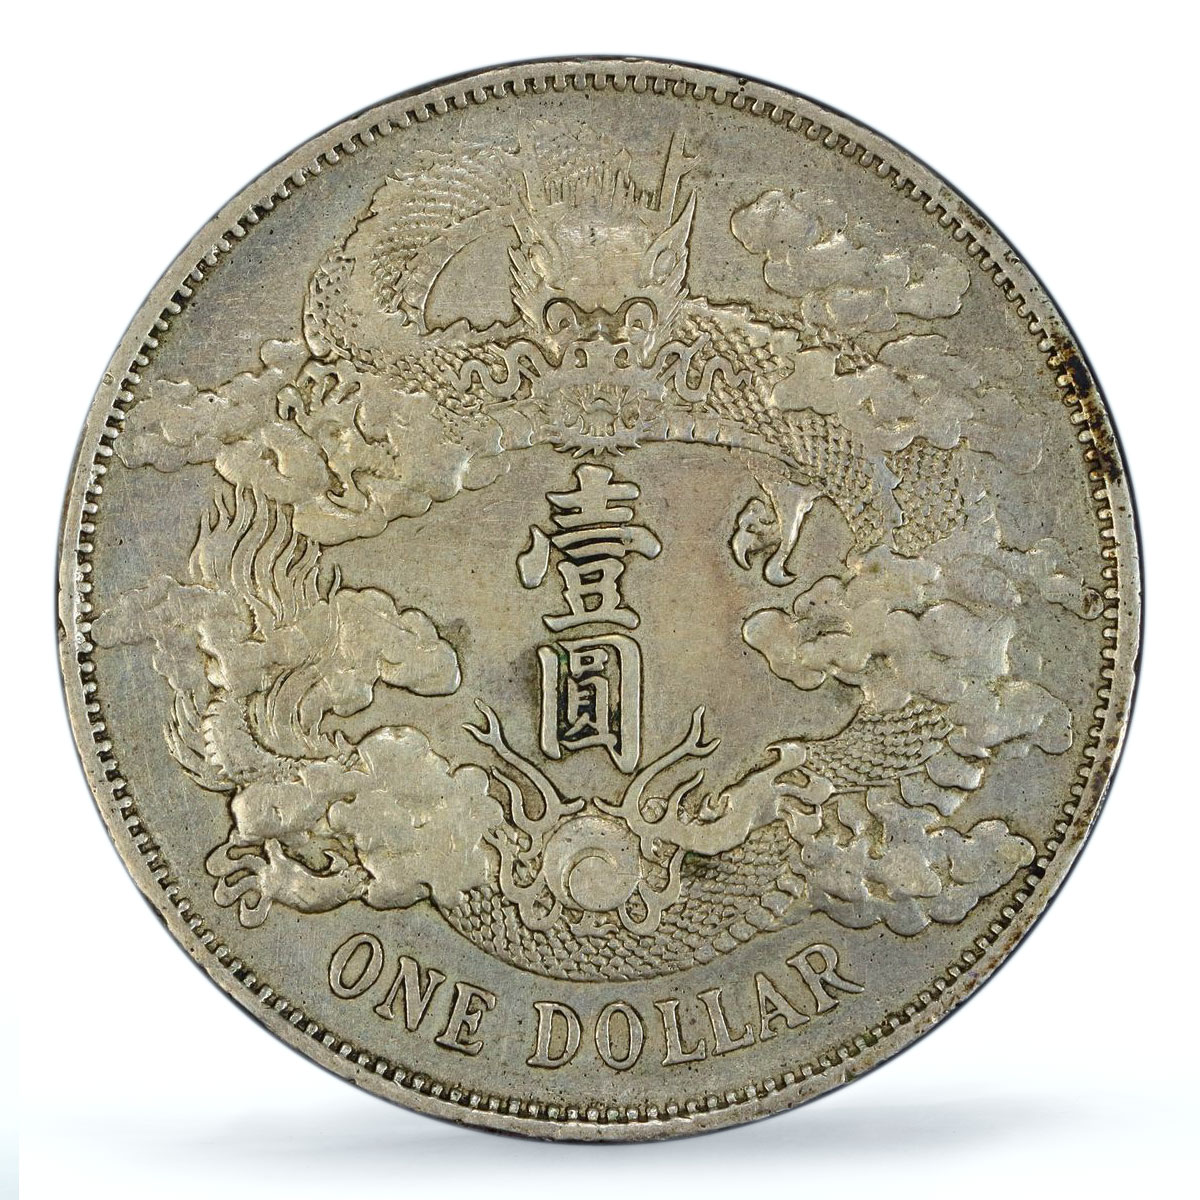 China Empire 1 dollar Guangxu Dragon Extra Flame Y-31 XF PCGS silver coin 1911